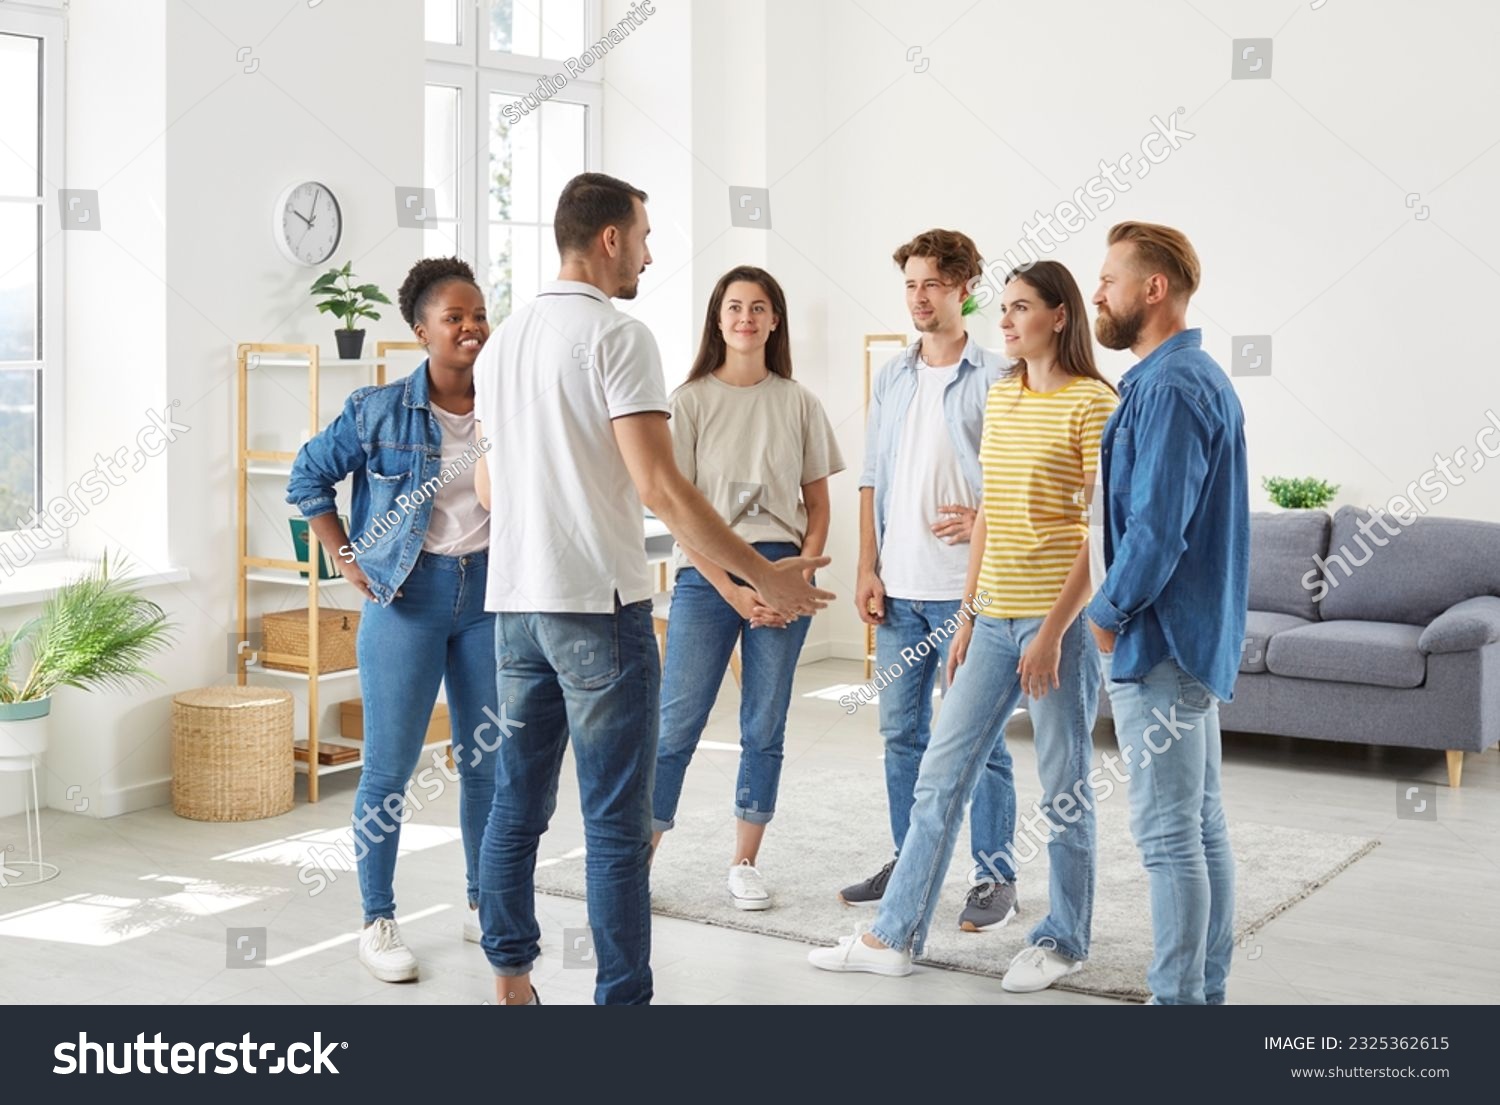 Group of diverse friends having a discussion. Several young multiracial people standing in the living room at home and listening to a young man talking about something #2325362615